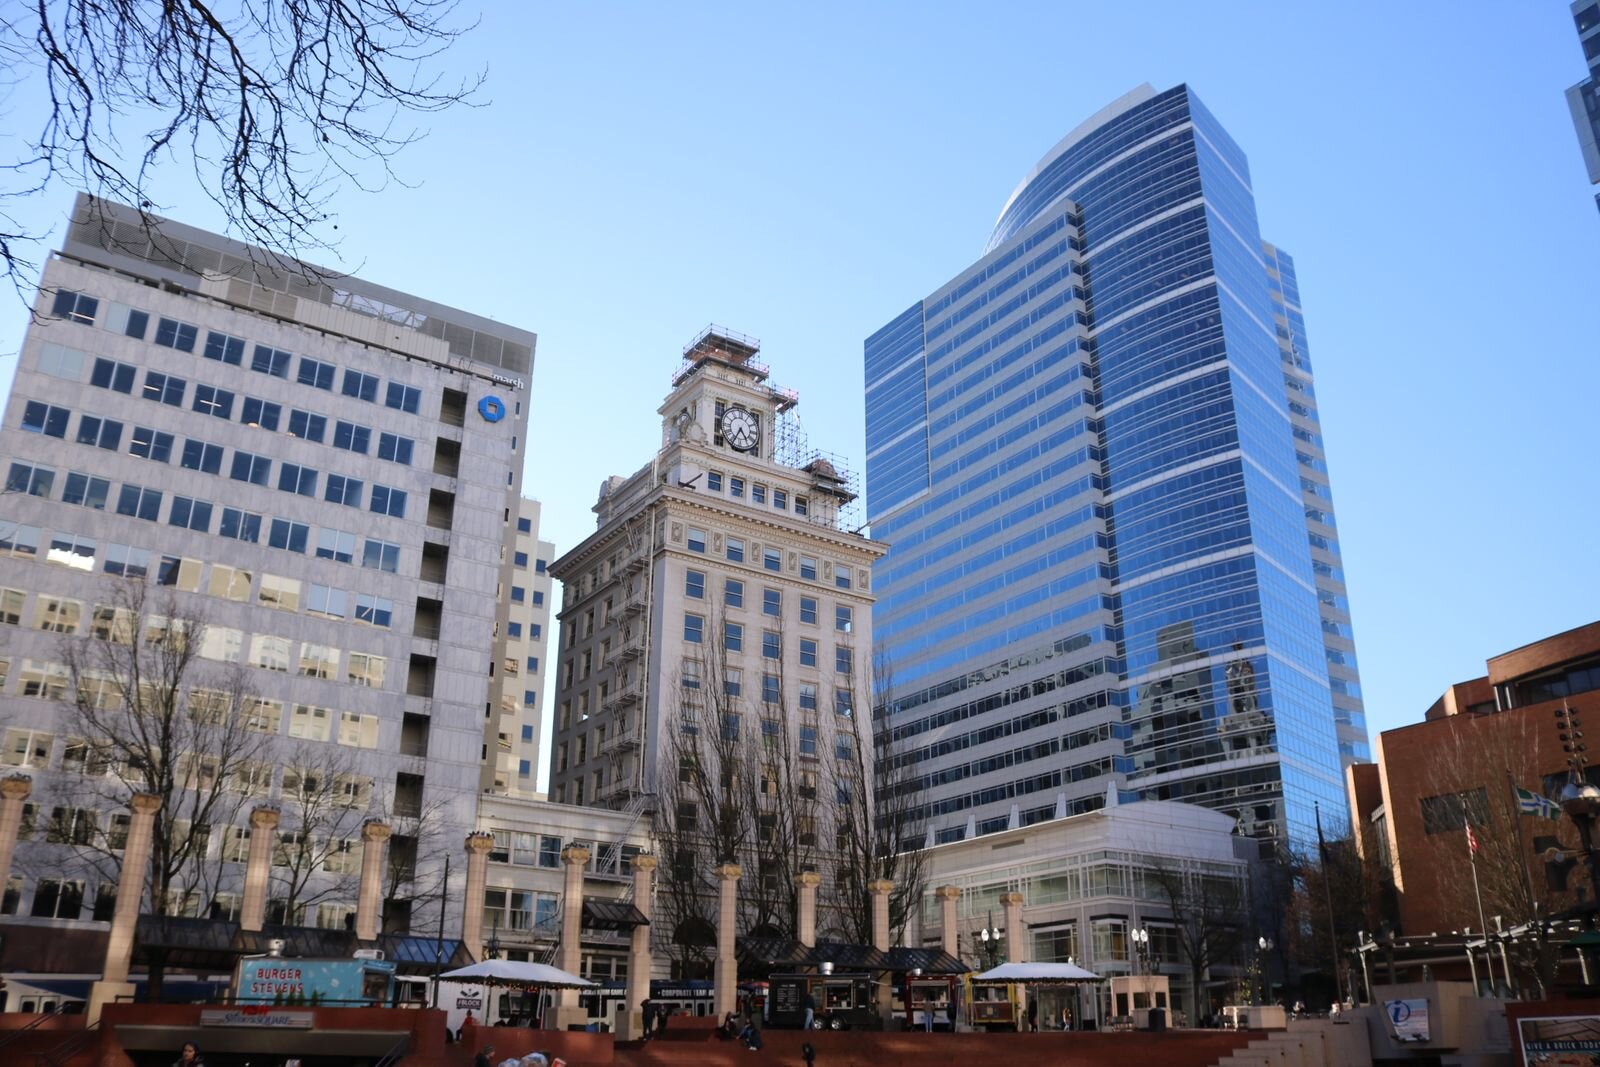 The many highrise buildings of Downtown Portland